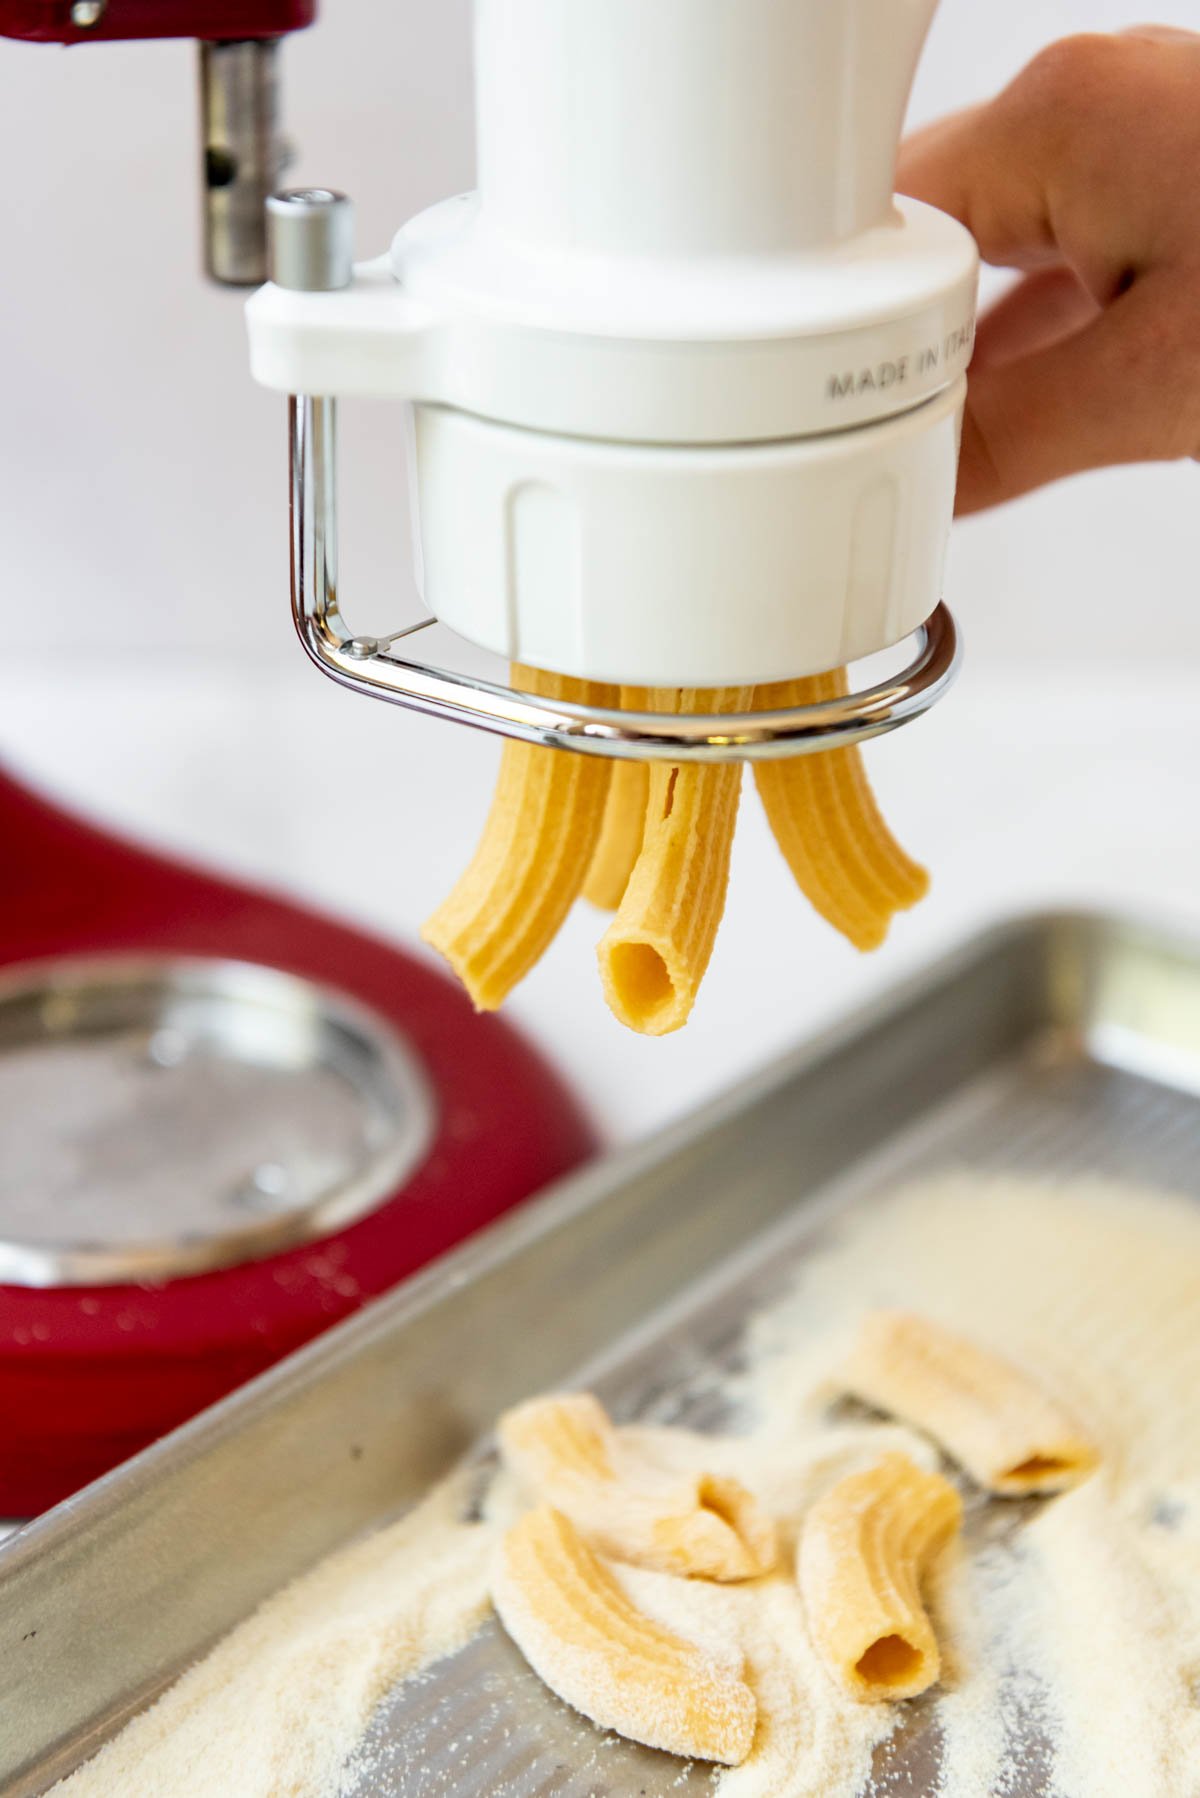 Fresh rigatoni pasta tubes being extruded from a KitchenAid pasta attachment.